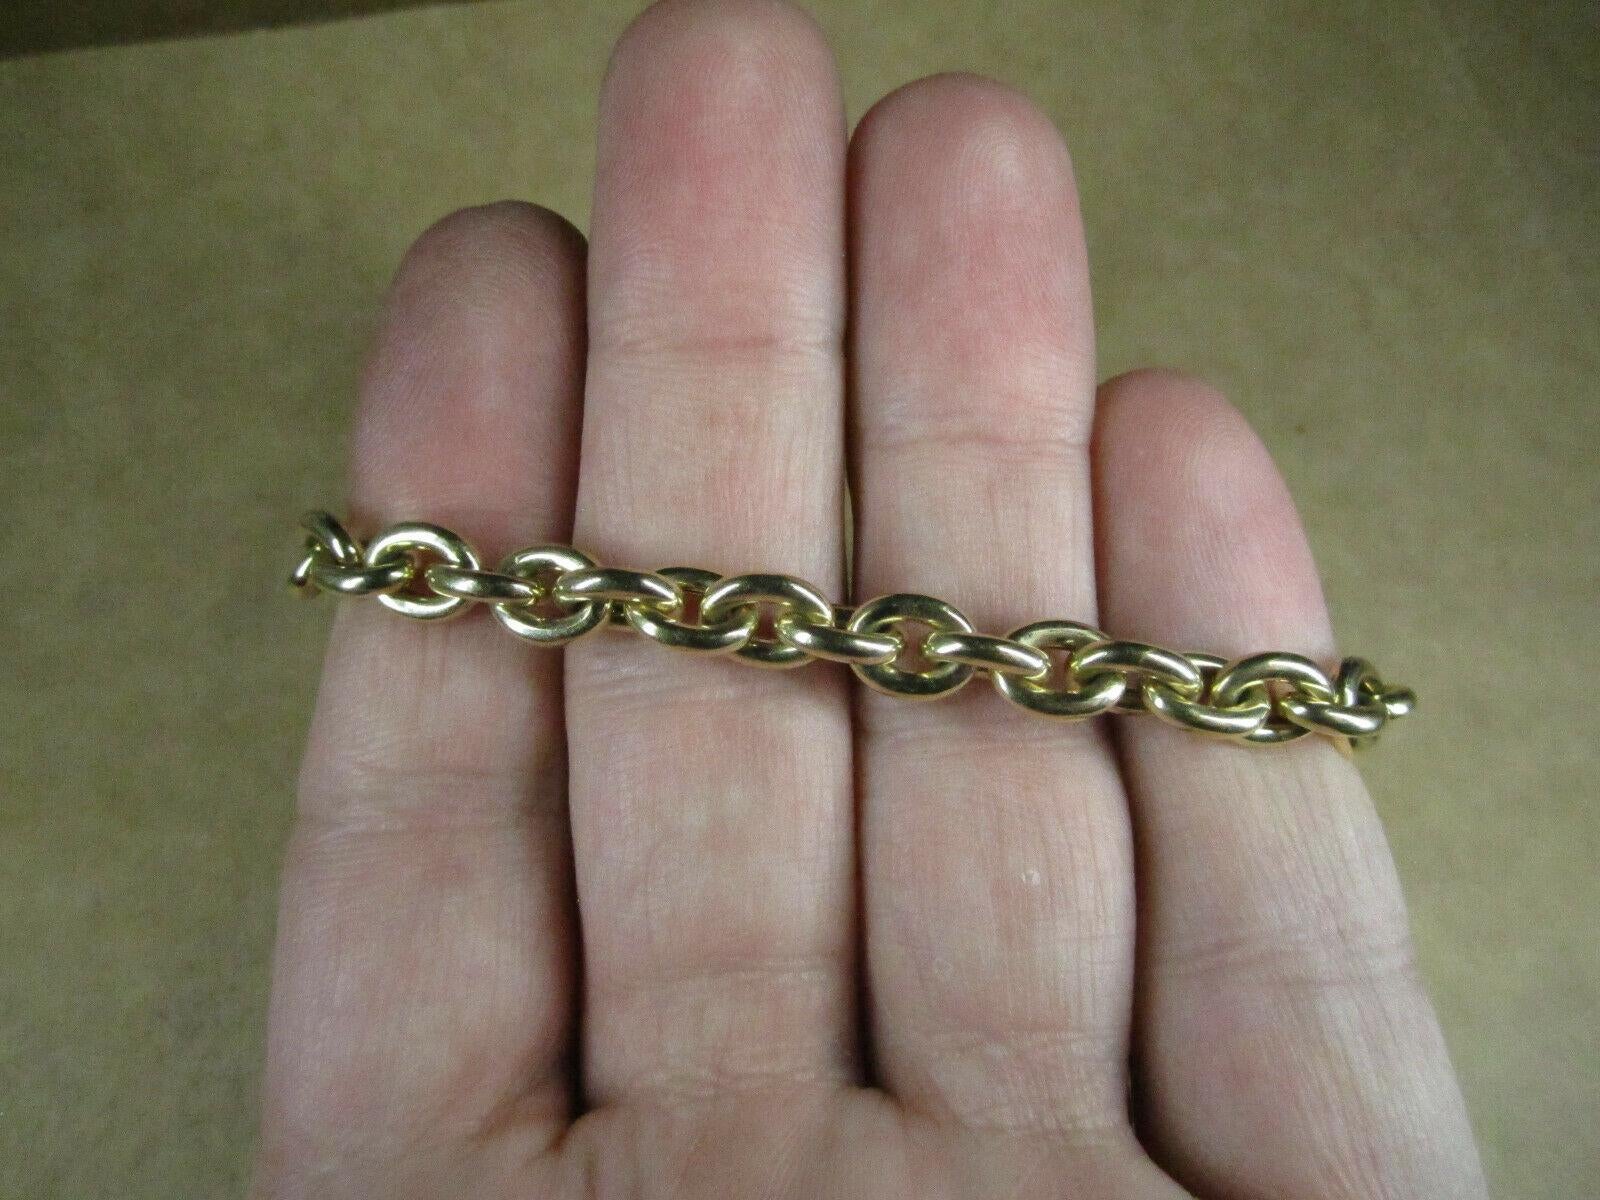 Cartier Swiss 18k Yellow Gold Link Bracelet Vintage Fully Signed


Here is your chance to purchase a beautiful and highly collectible designer bracelet.  Truly a great piece at a great price! 

Weight: 15.5 grams

Dimensions: 7